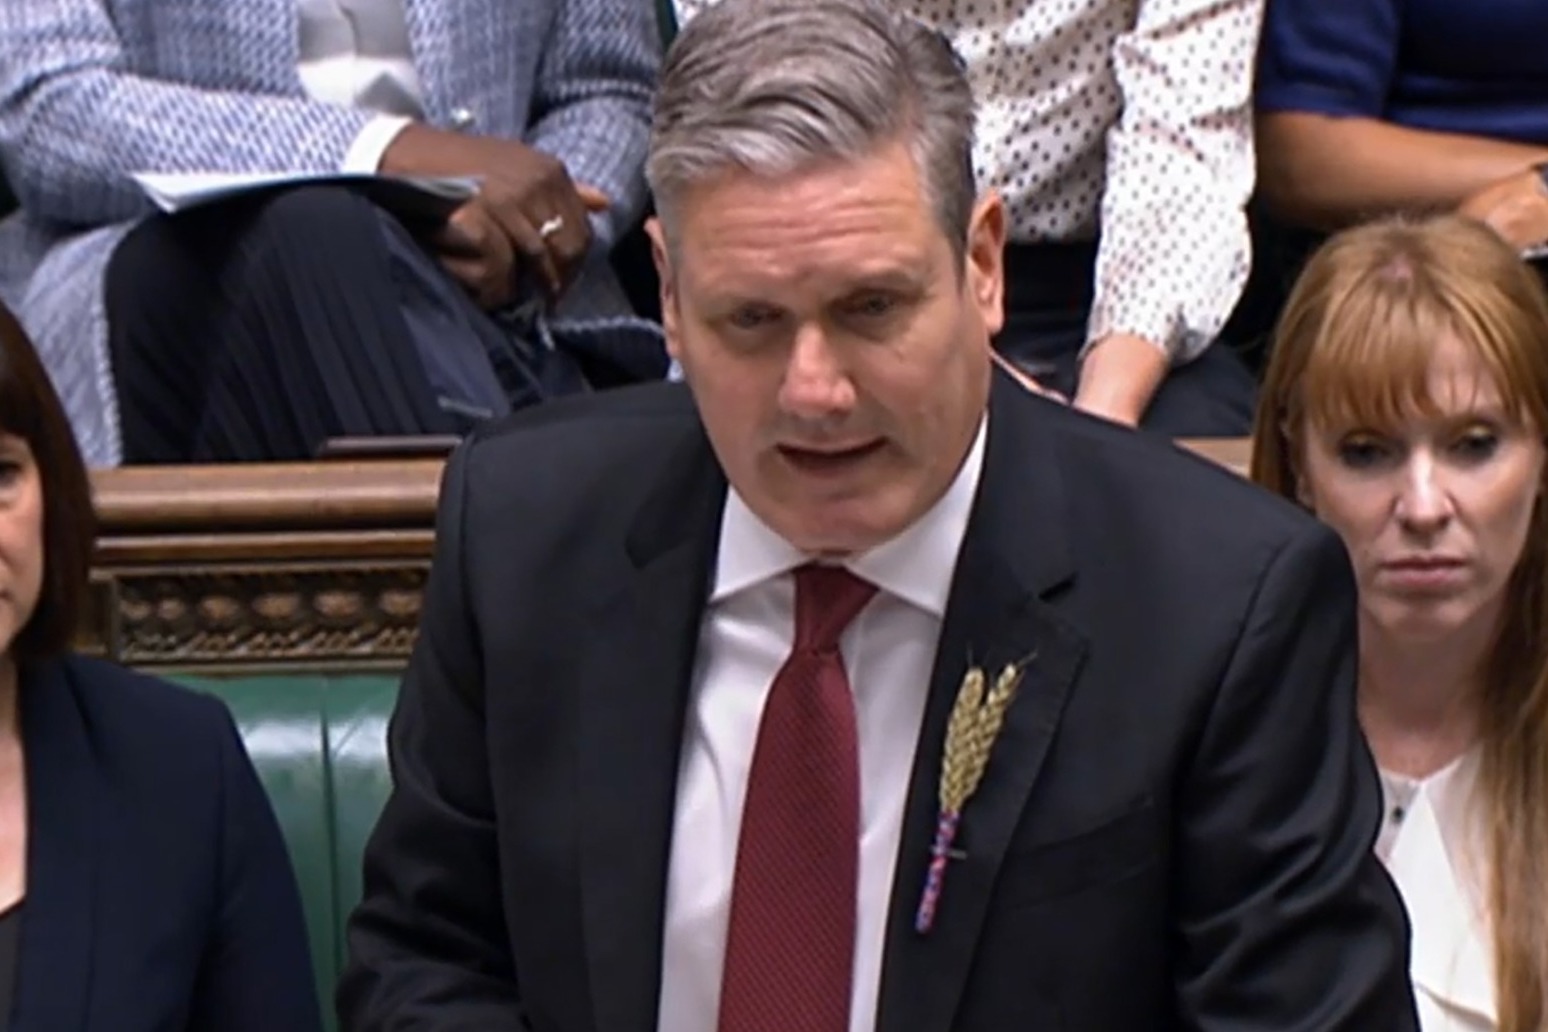 Starmer accused of ‘flip-flopping’ on housing by blocking pollution rules cut 